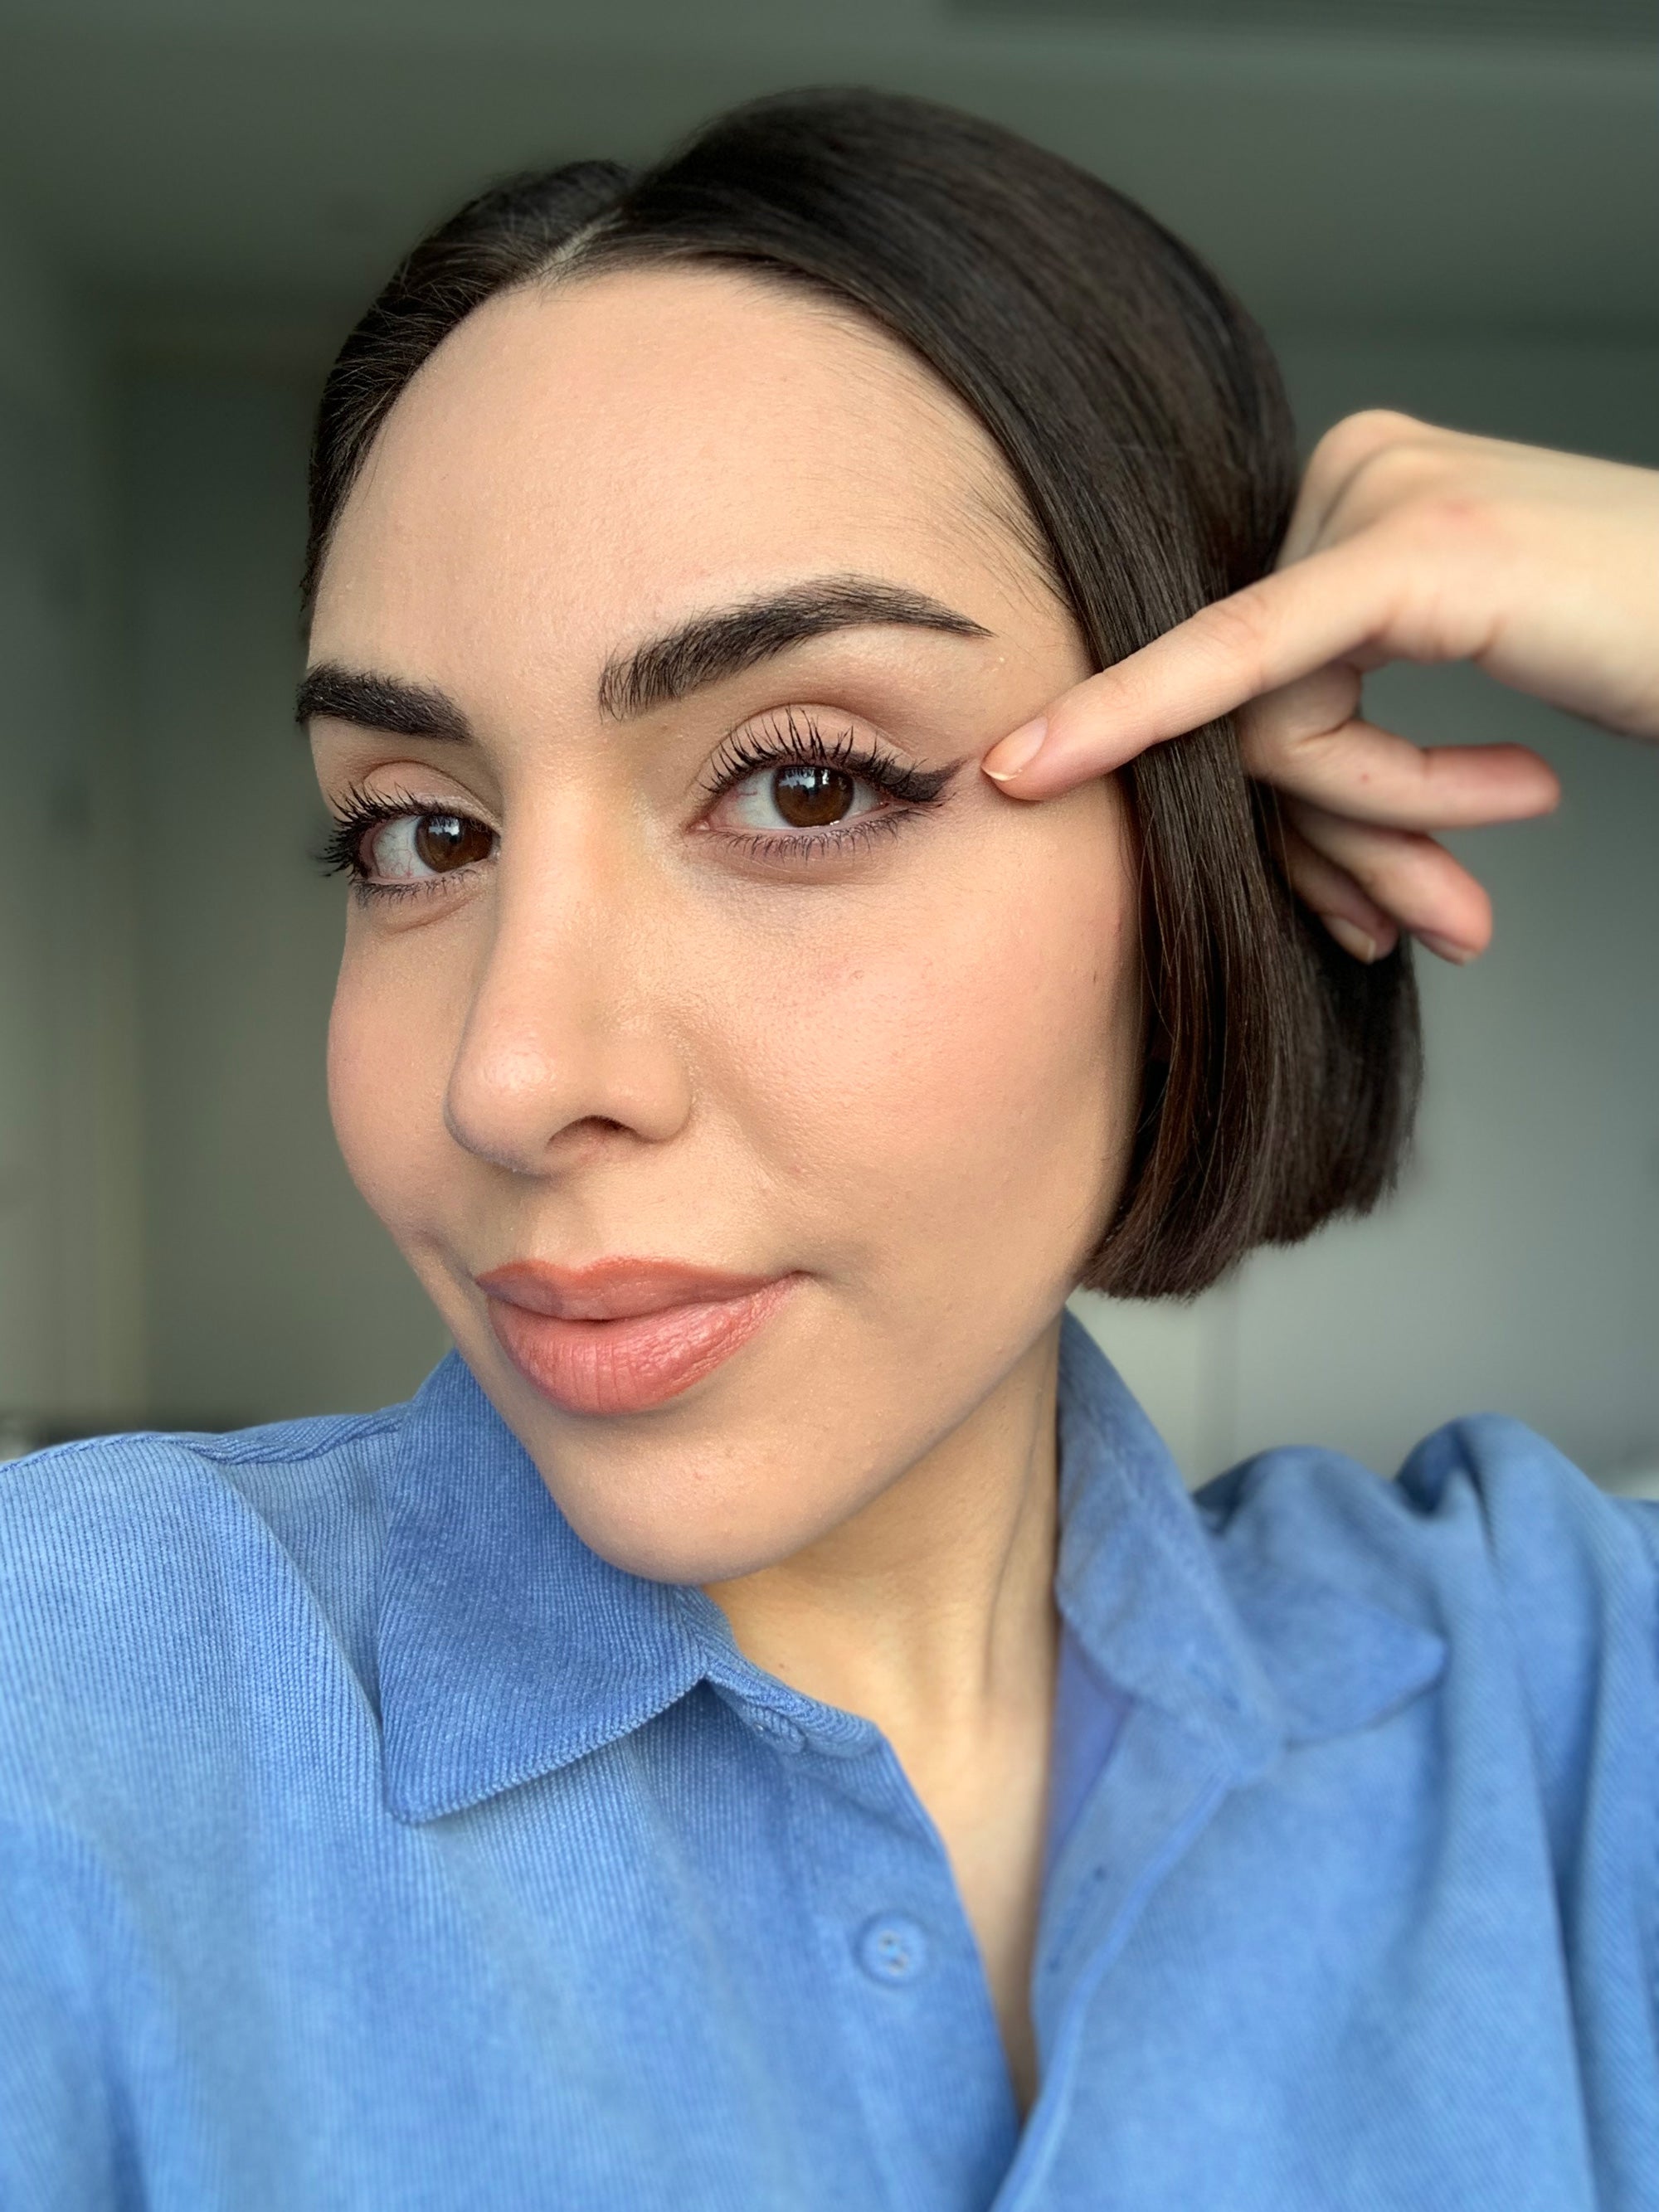 How to Create a Gorgeous Double-Winged Eyeliner Look